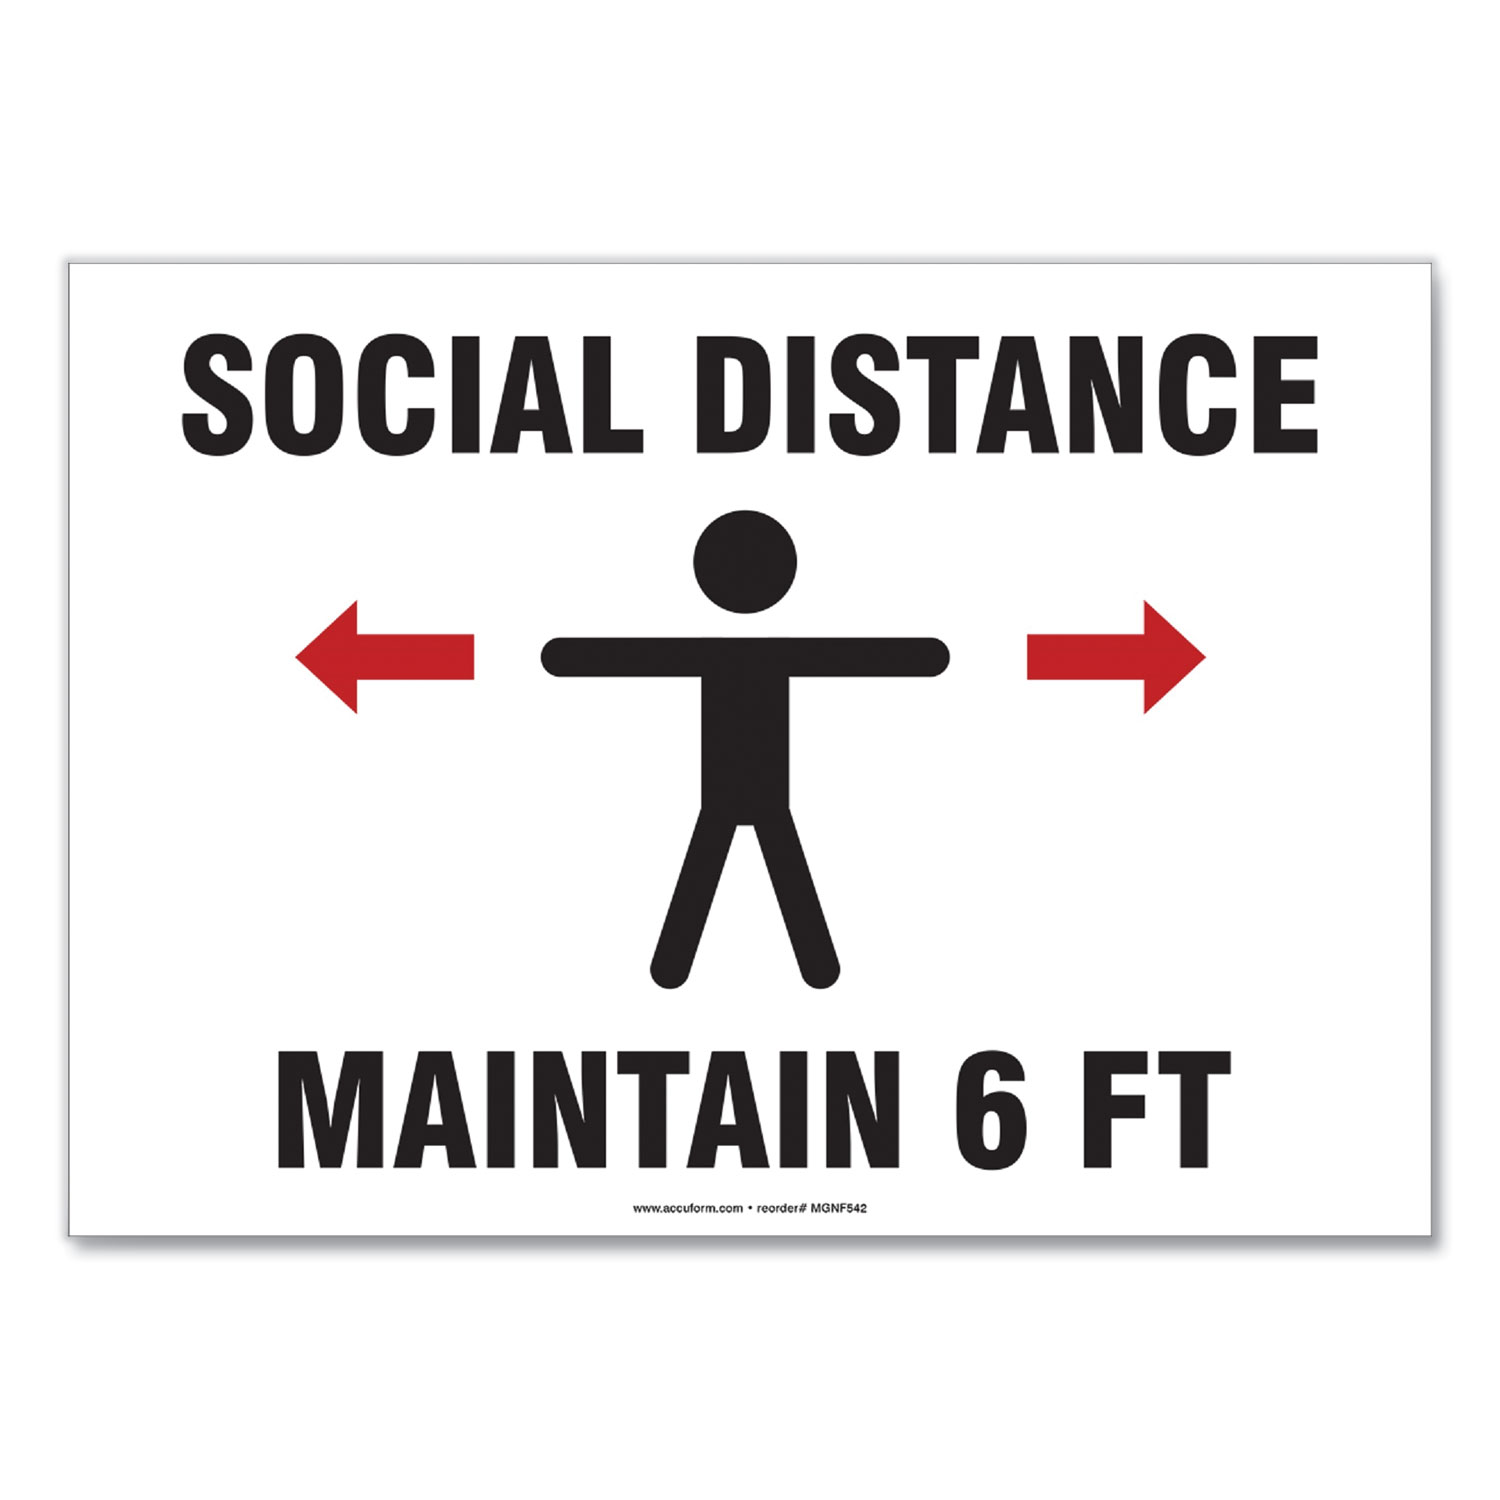  Accuform Social Distance Signs, Wall, 14 x 10, Social Distance Maintain 6 ft, Human/Arrows, White, 10/Pack (GN1MGNF542VPESP) 